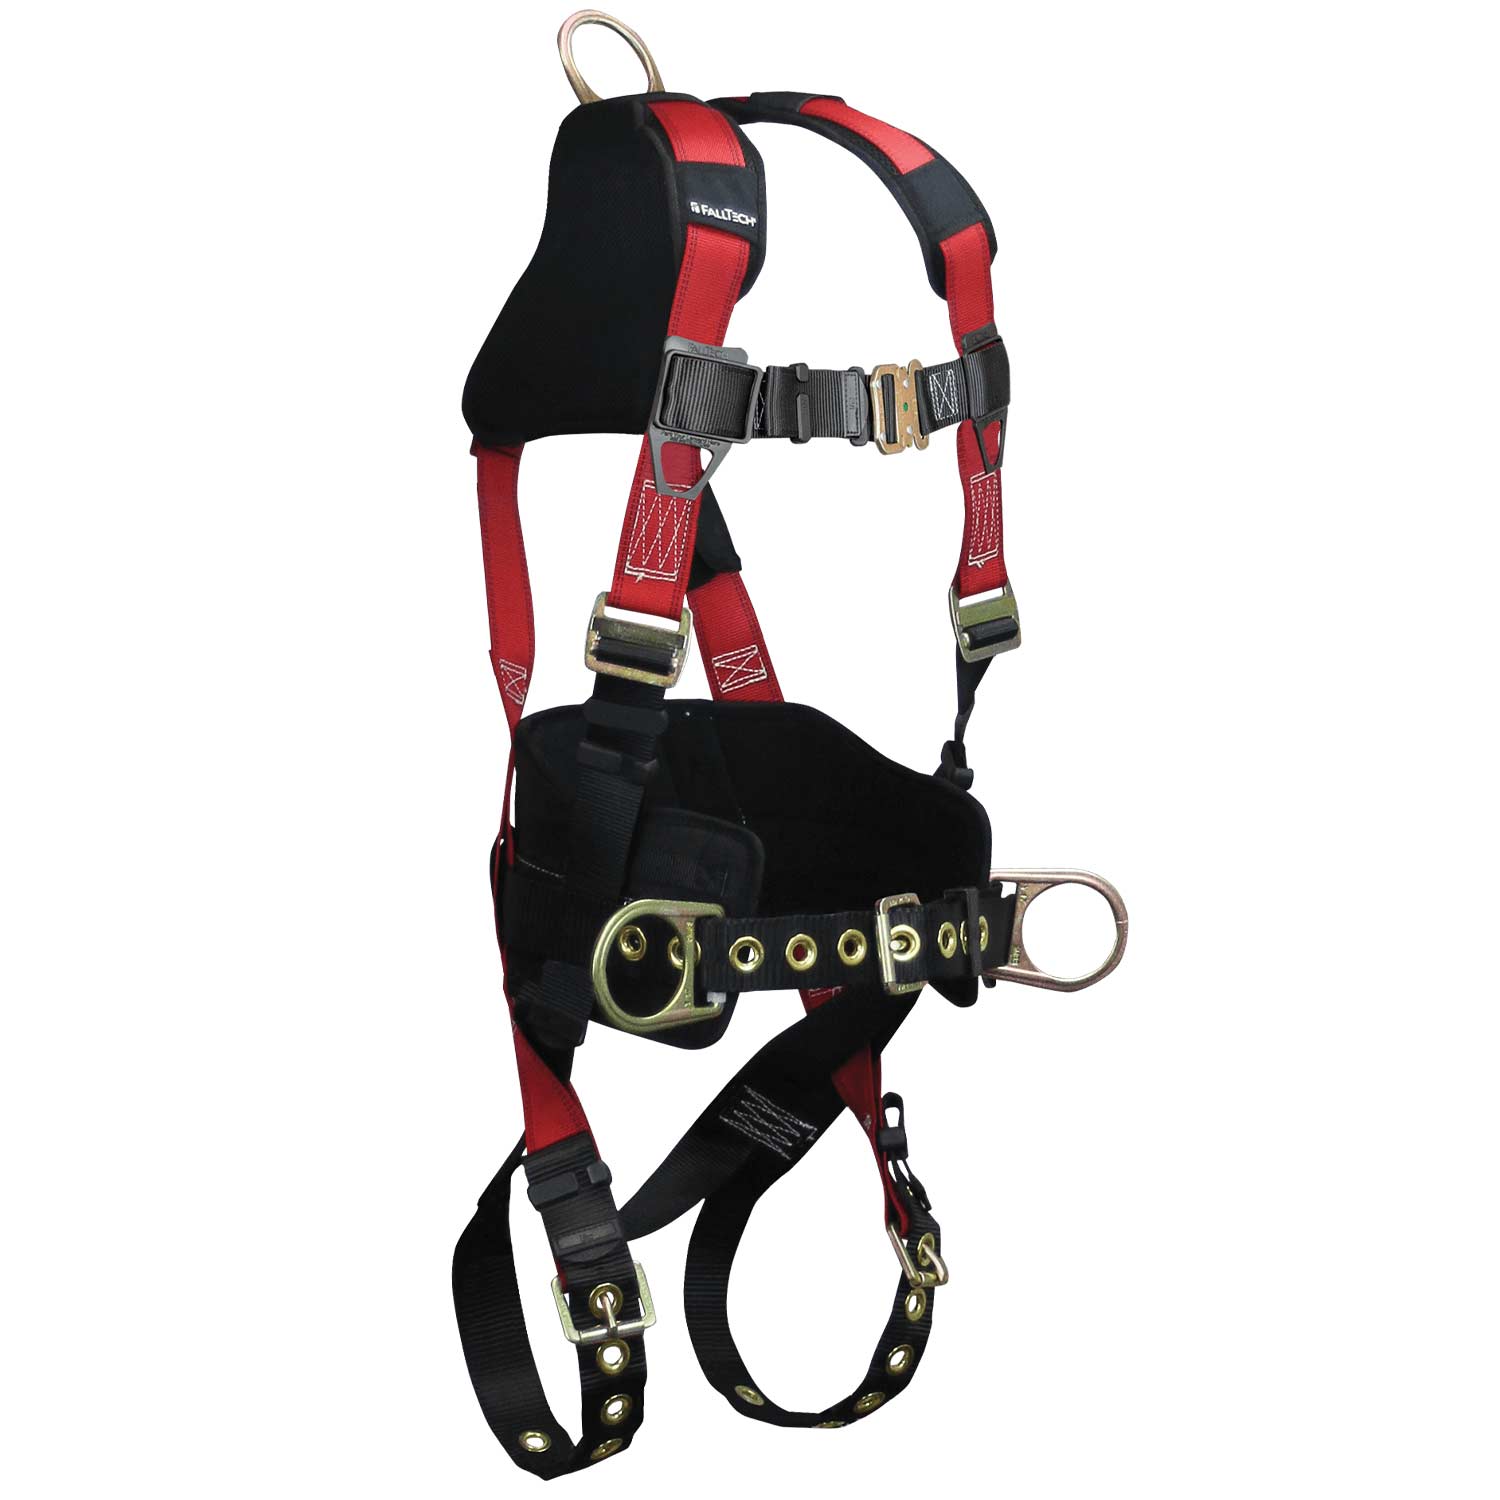 Full Body Harness Built-in Lanyard & Large Hook, Fall Protection